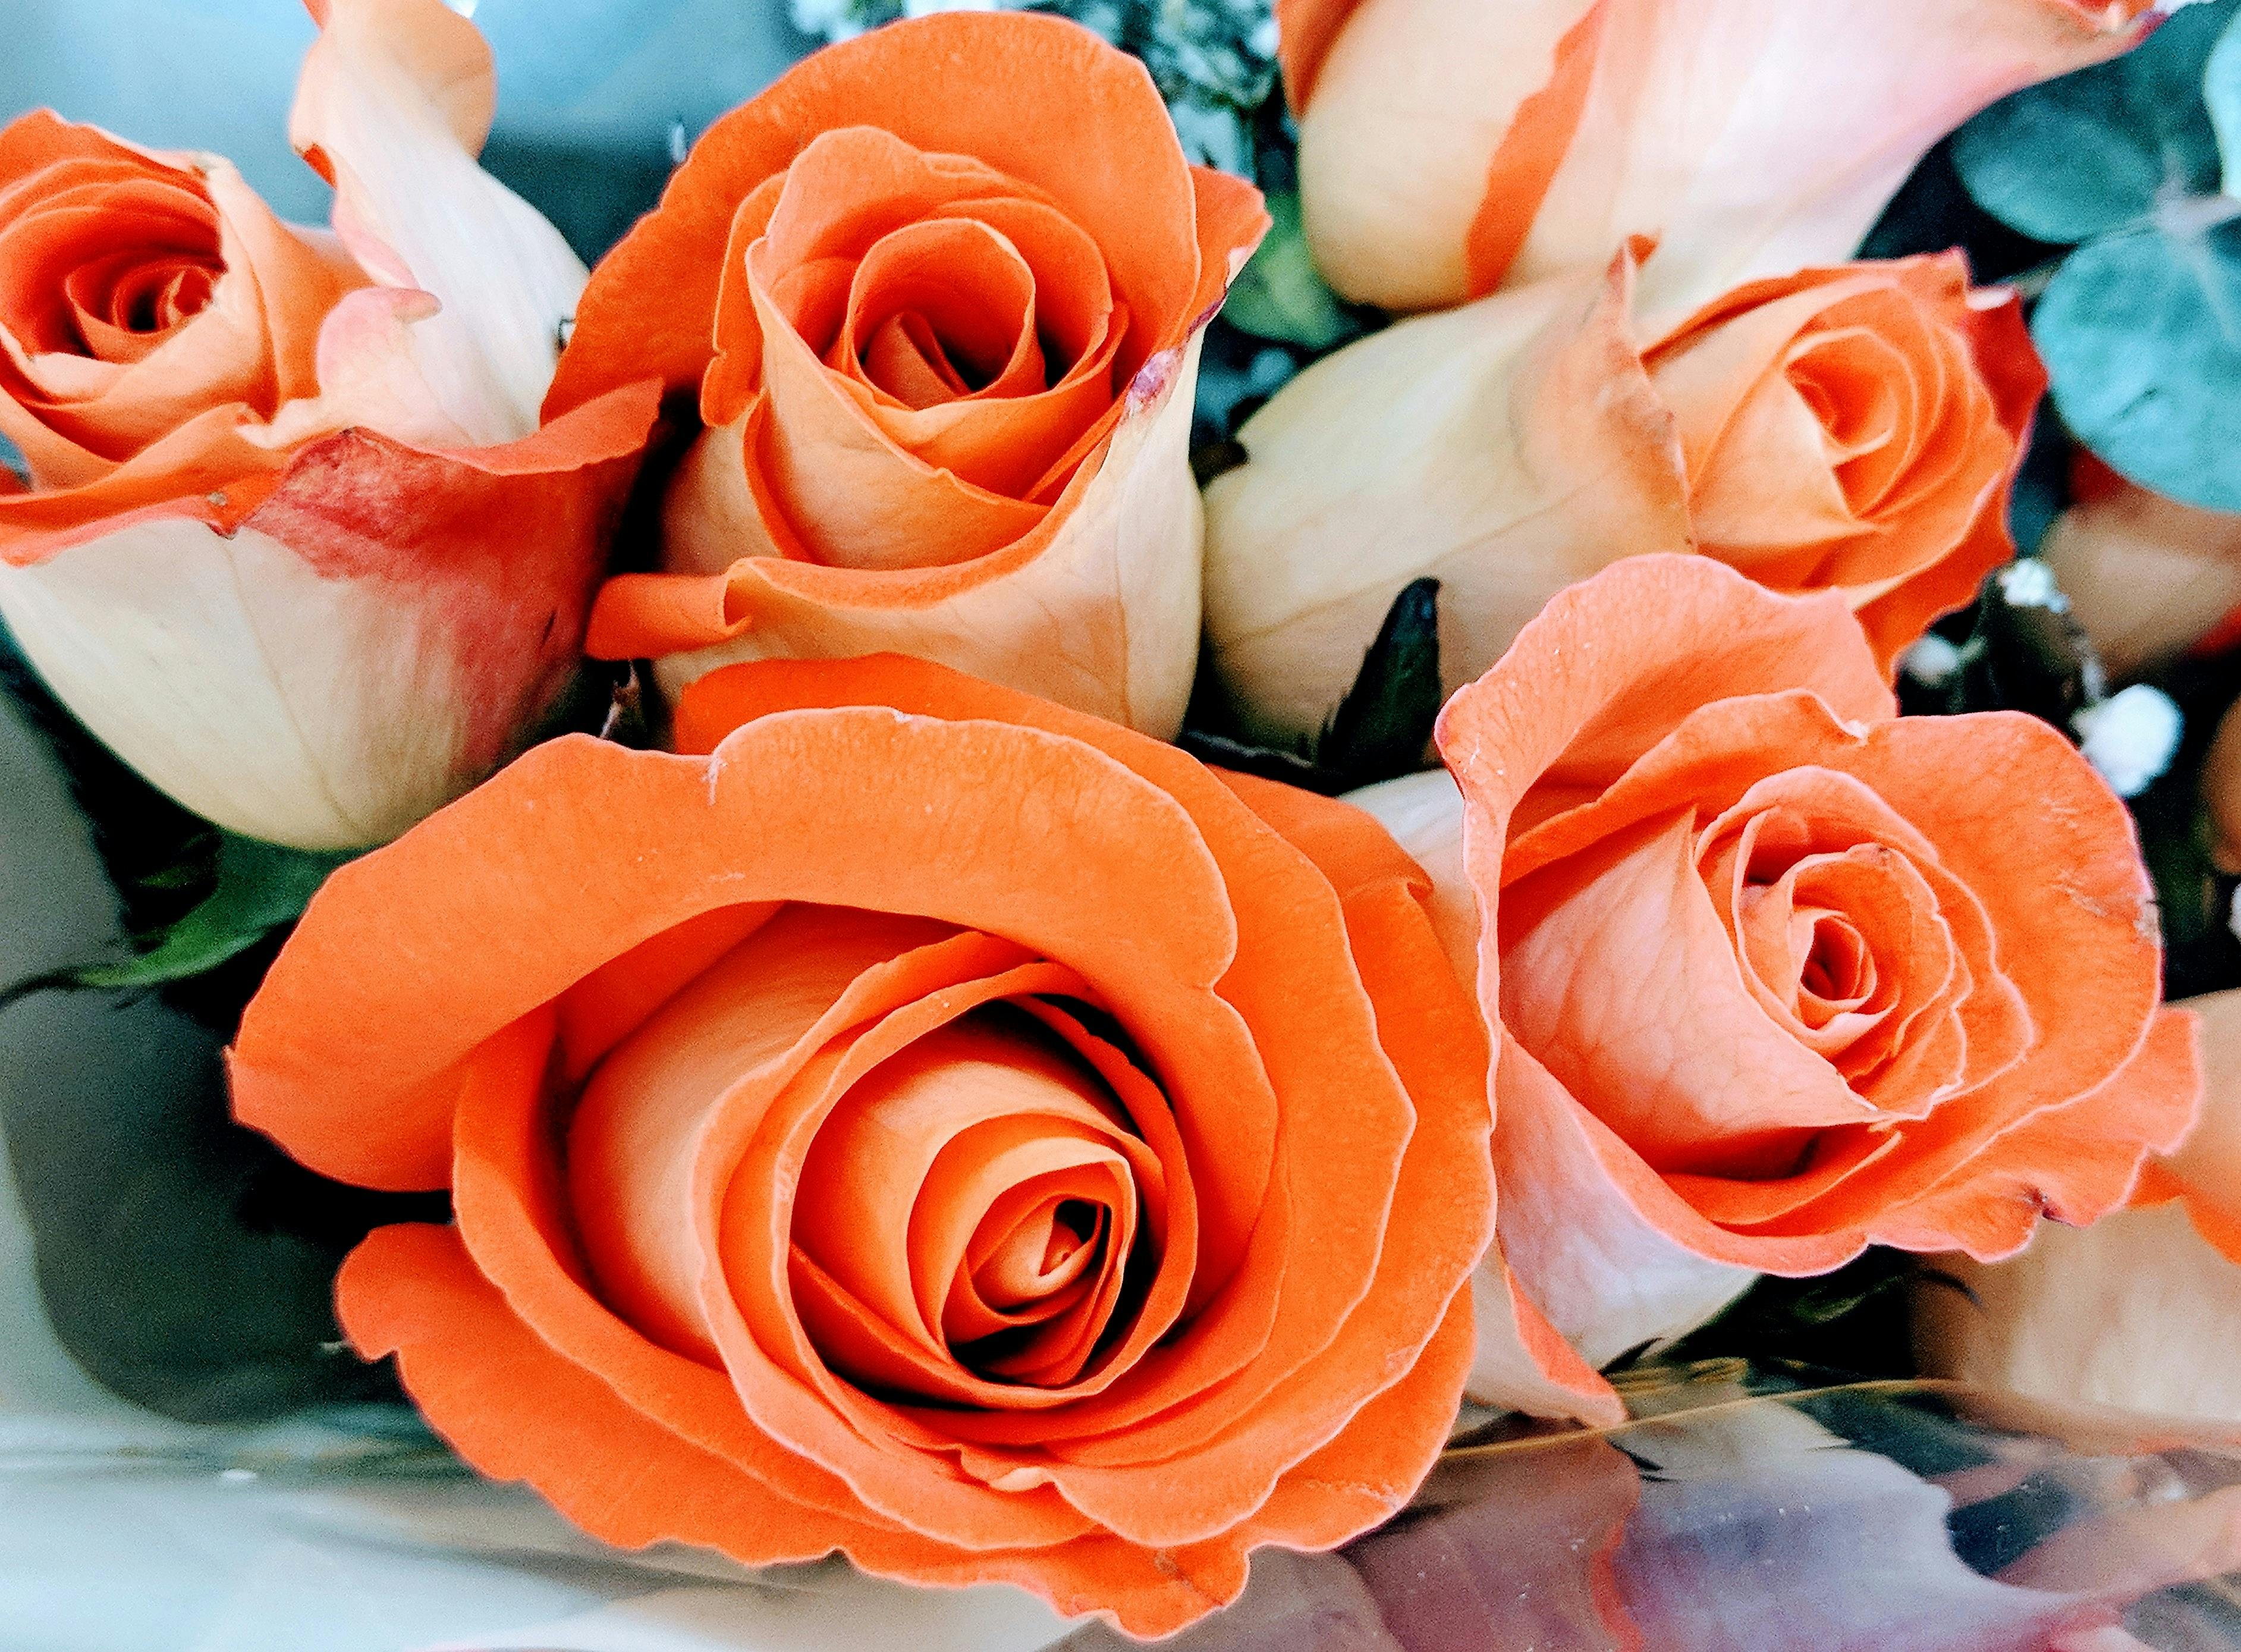 Free stock photo of coral flowers, flowers, peach roses